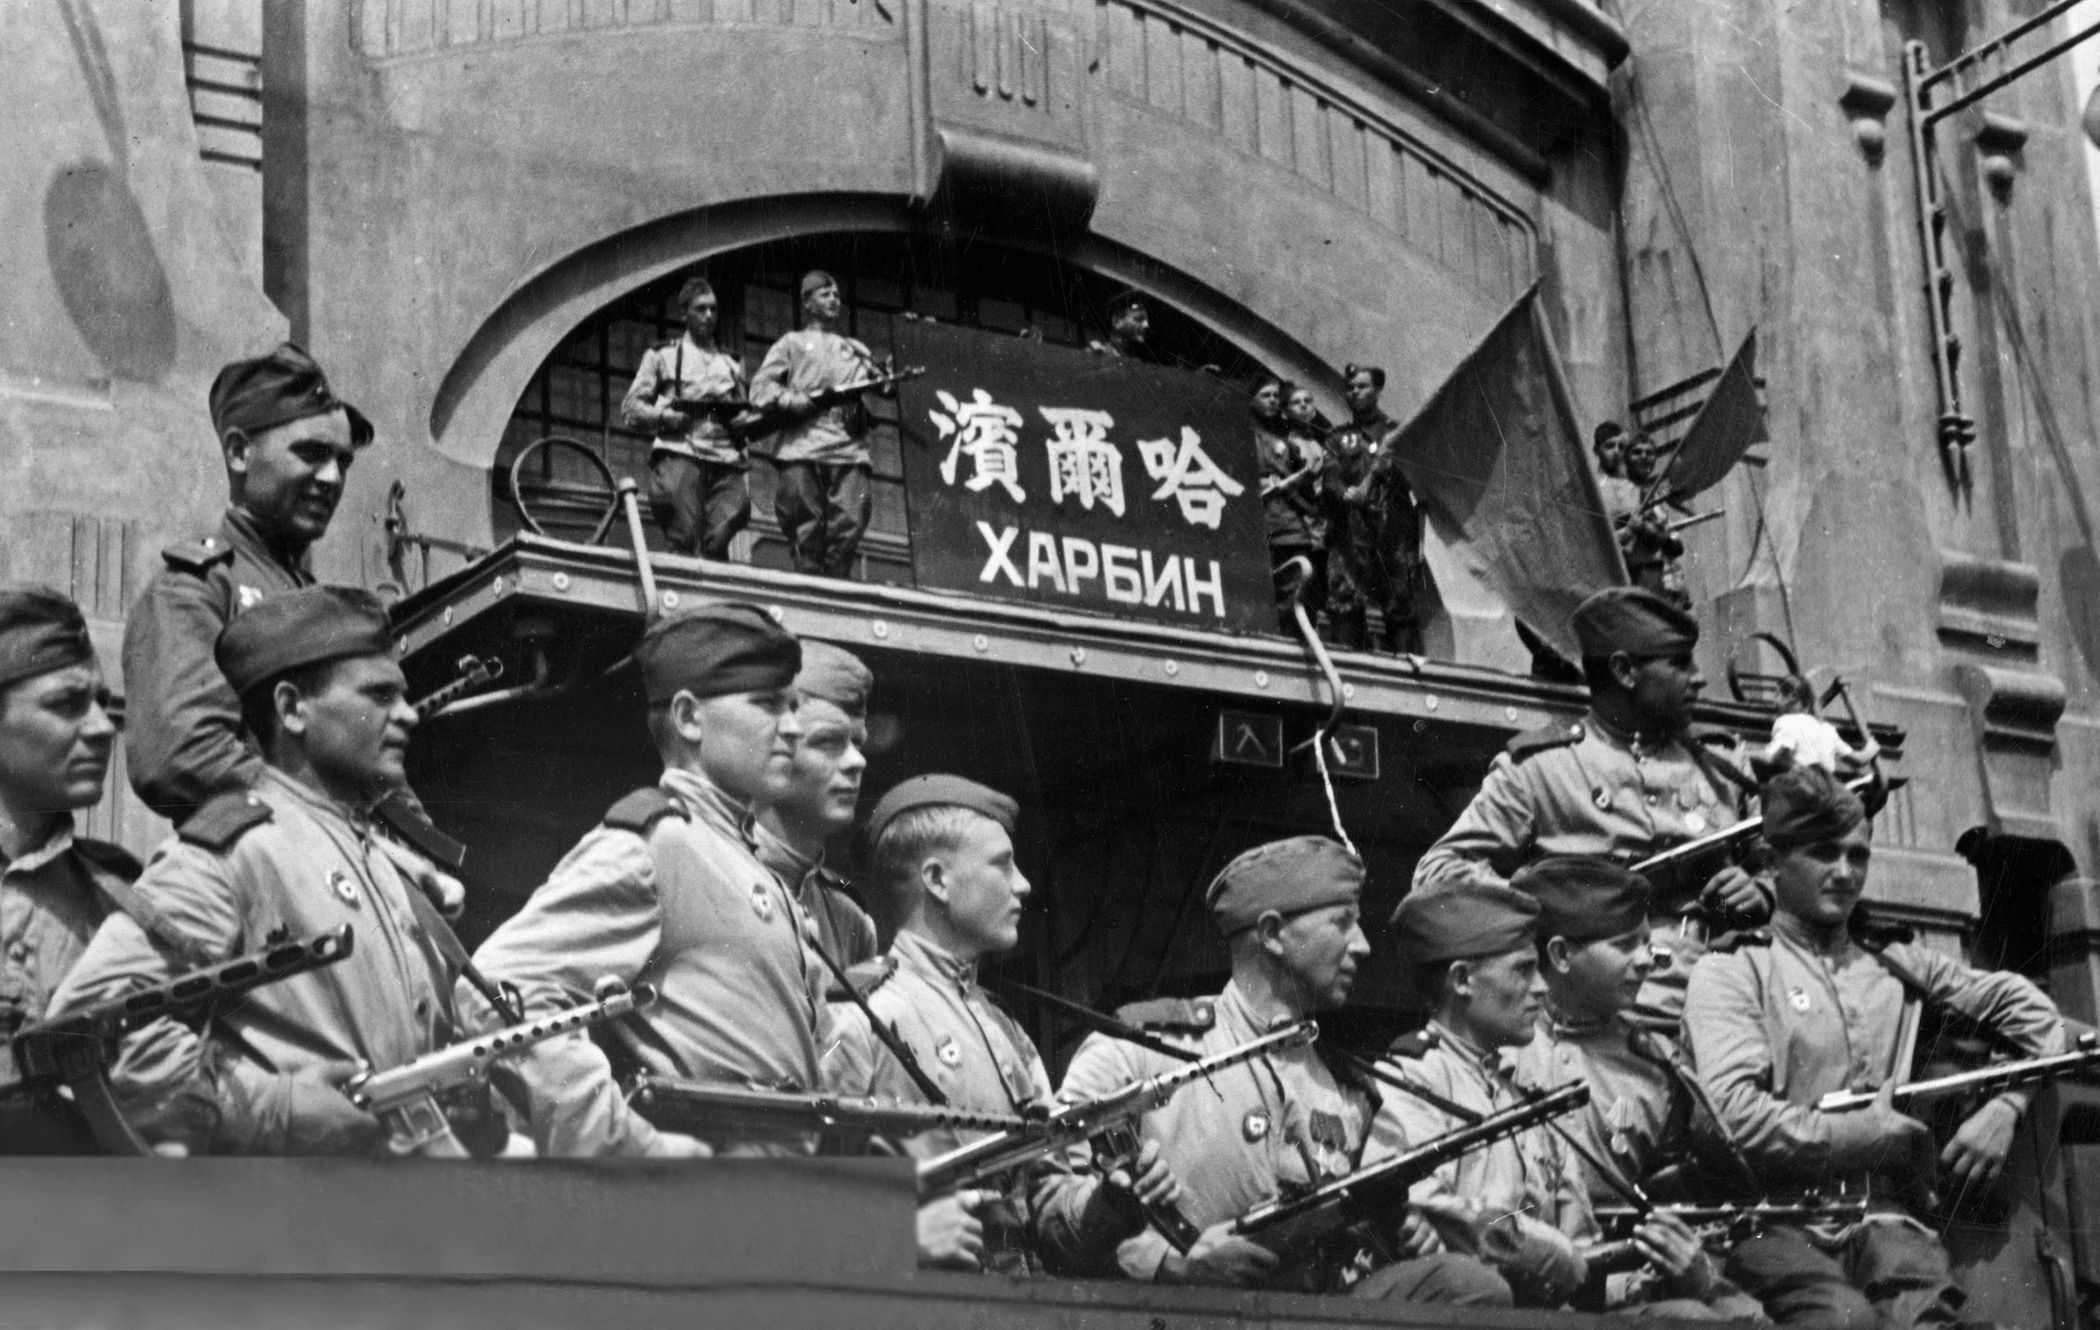 Swaggering Soviet troops liberate Harbin, Manchuria. The Soviets treated Chinese civilians brutally.